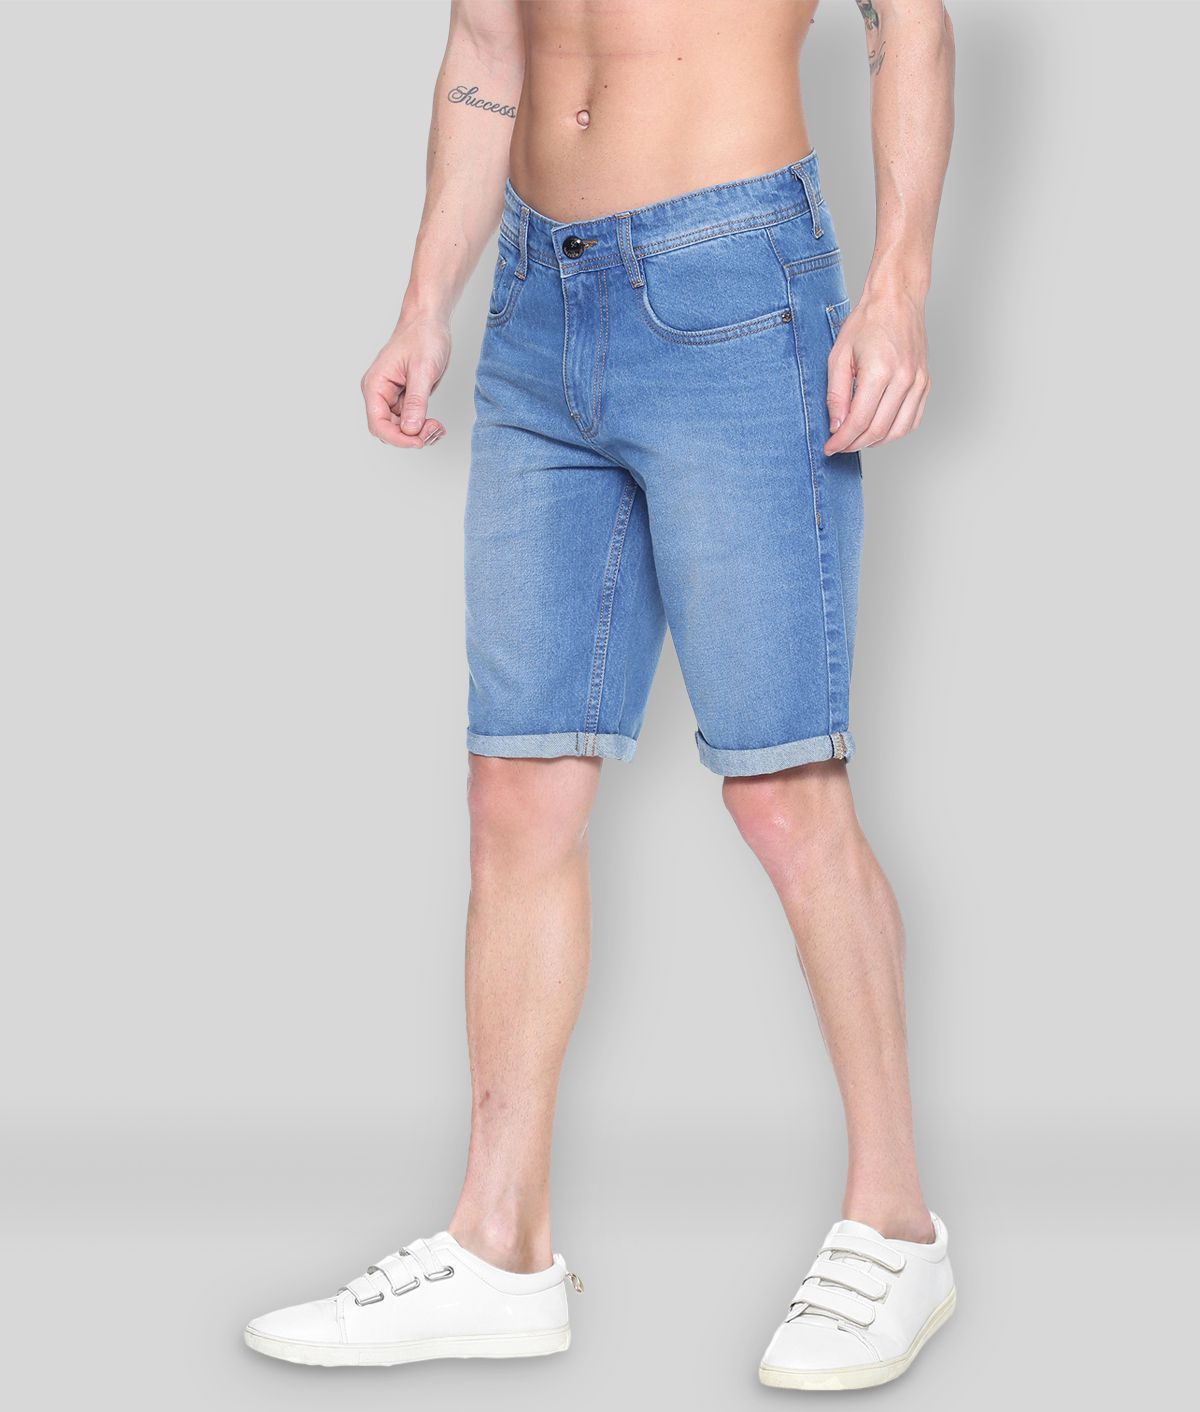 Raa Jeans - Blue Cotton Men's Shorts ( Pack of 1 ) - Buy Raa Jeans ...